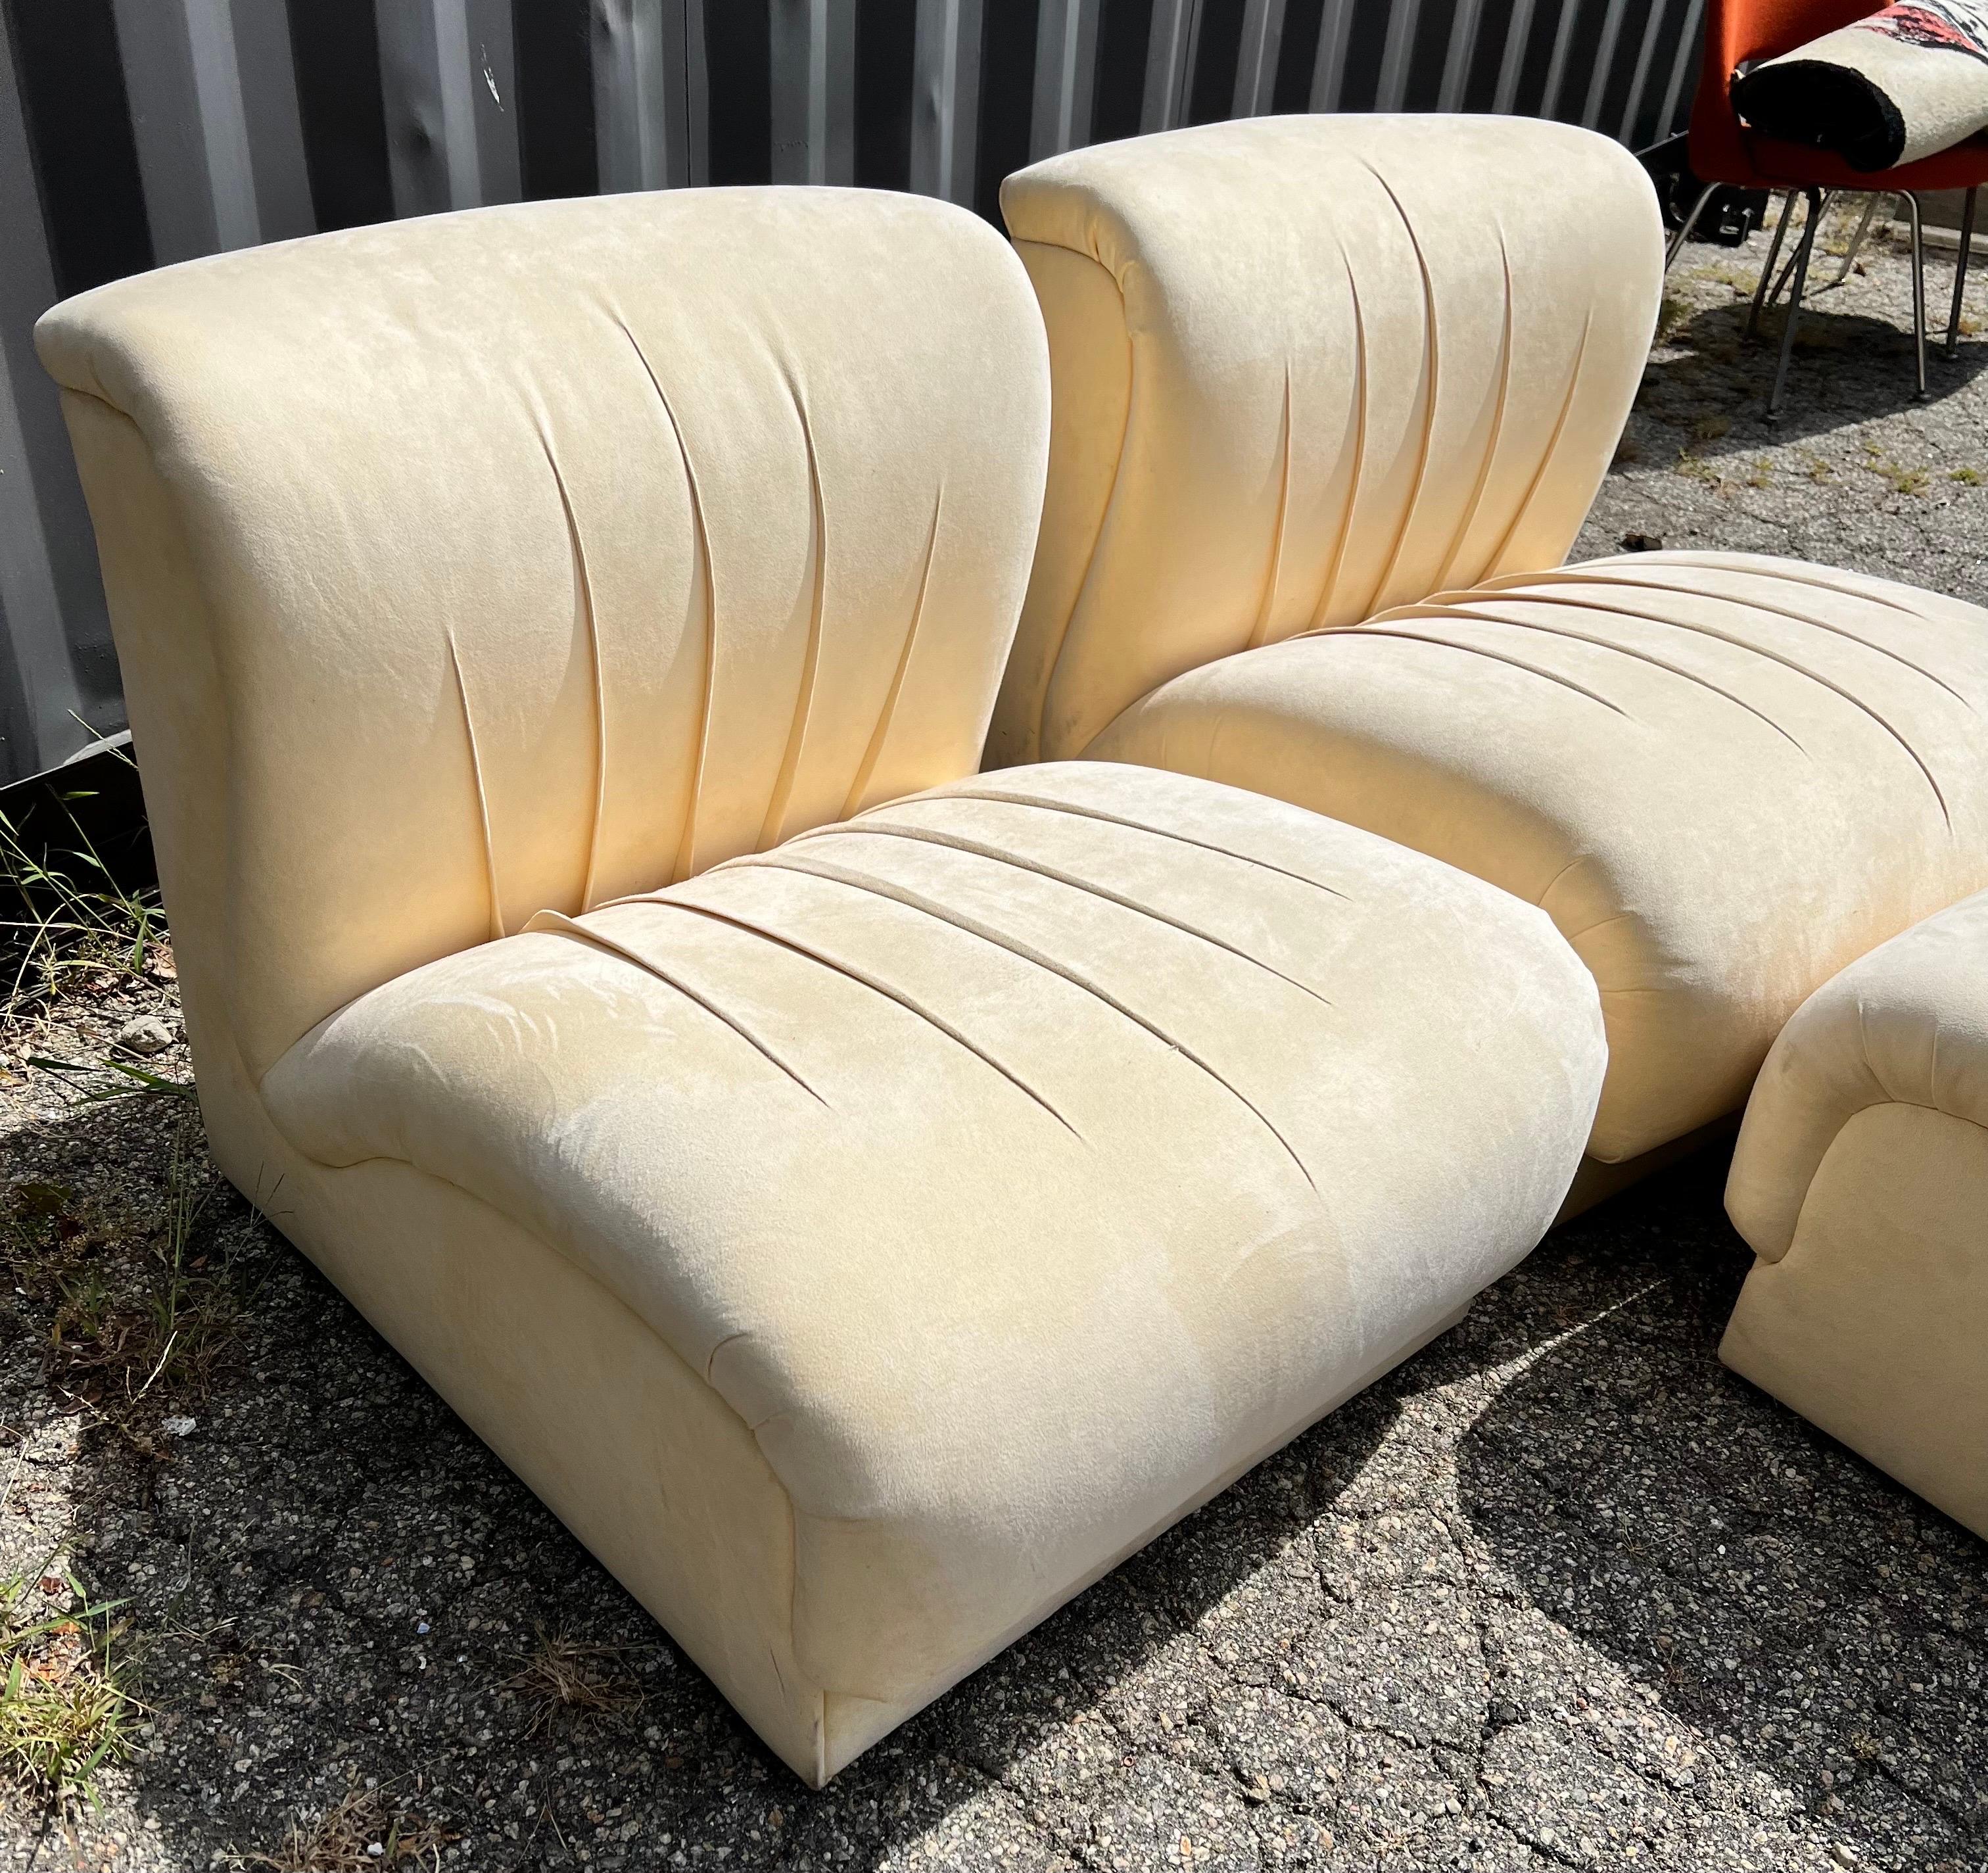 Late 20th Century Pair of Mid-Century Modern Slipper Chairs and Matching Single Ottoman